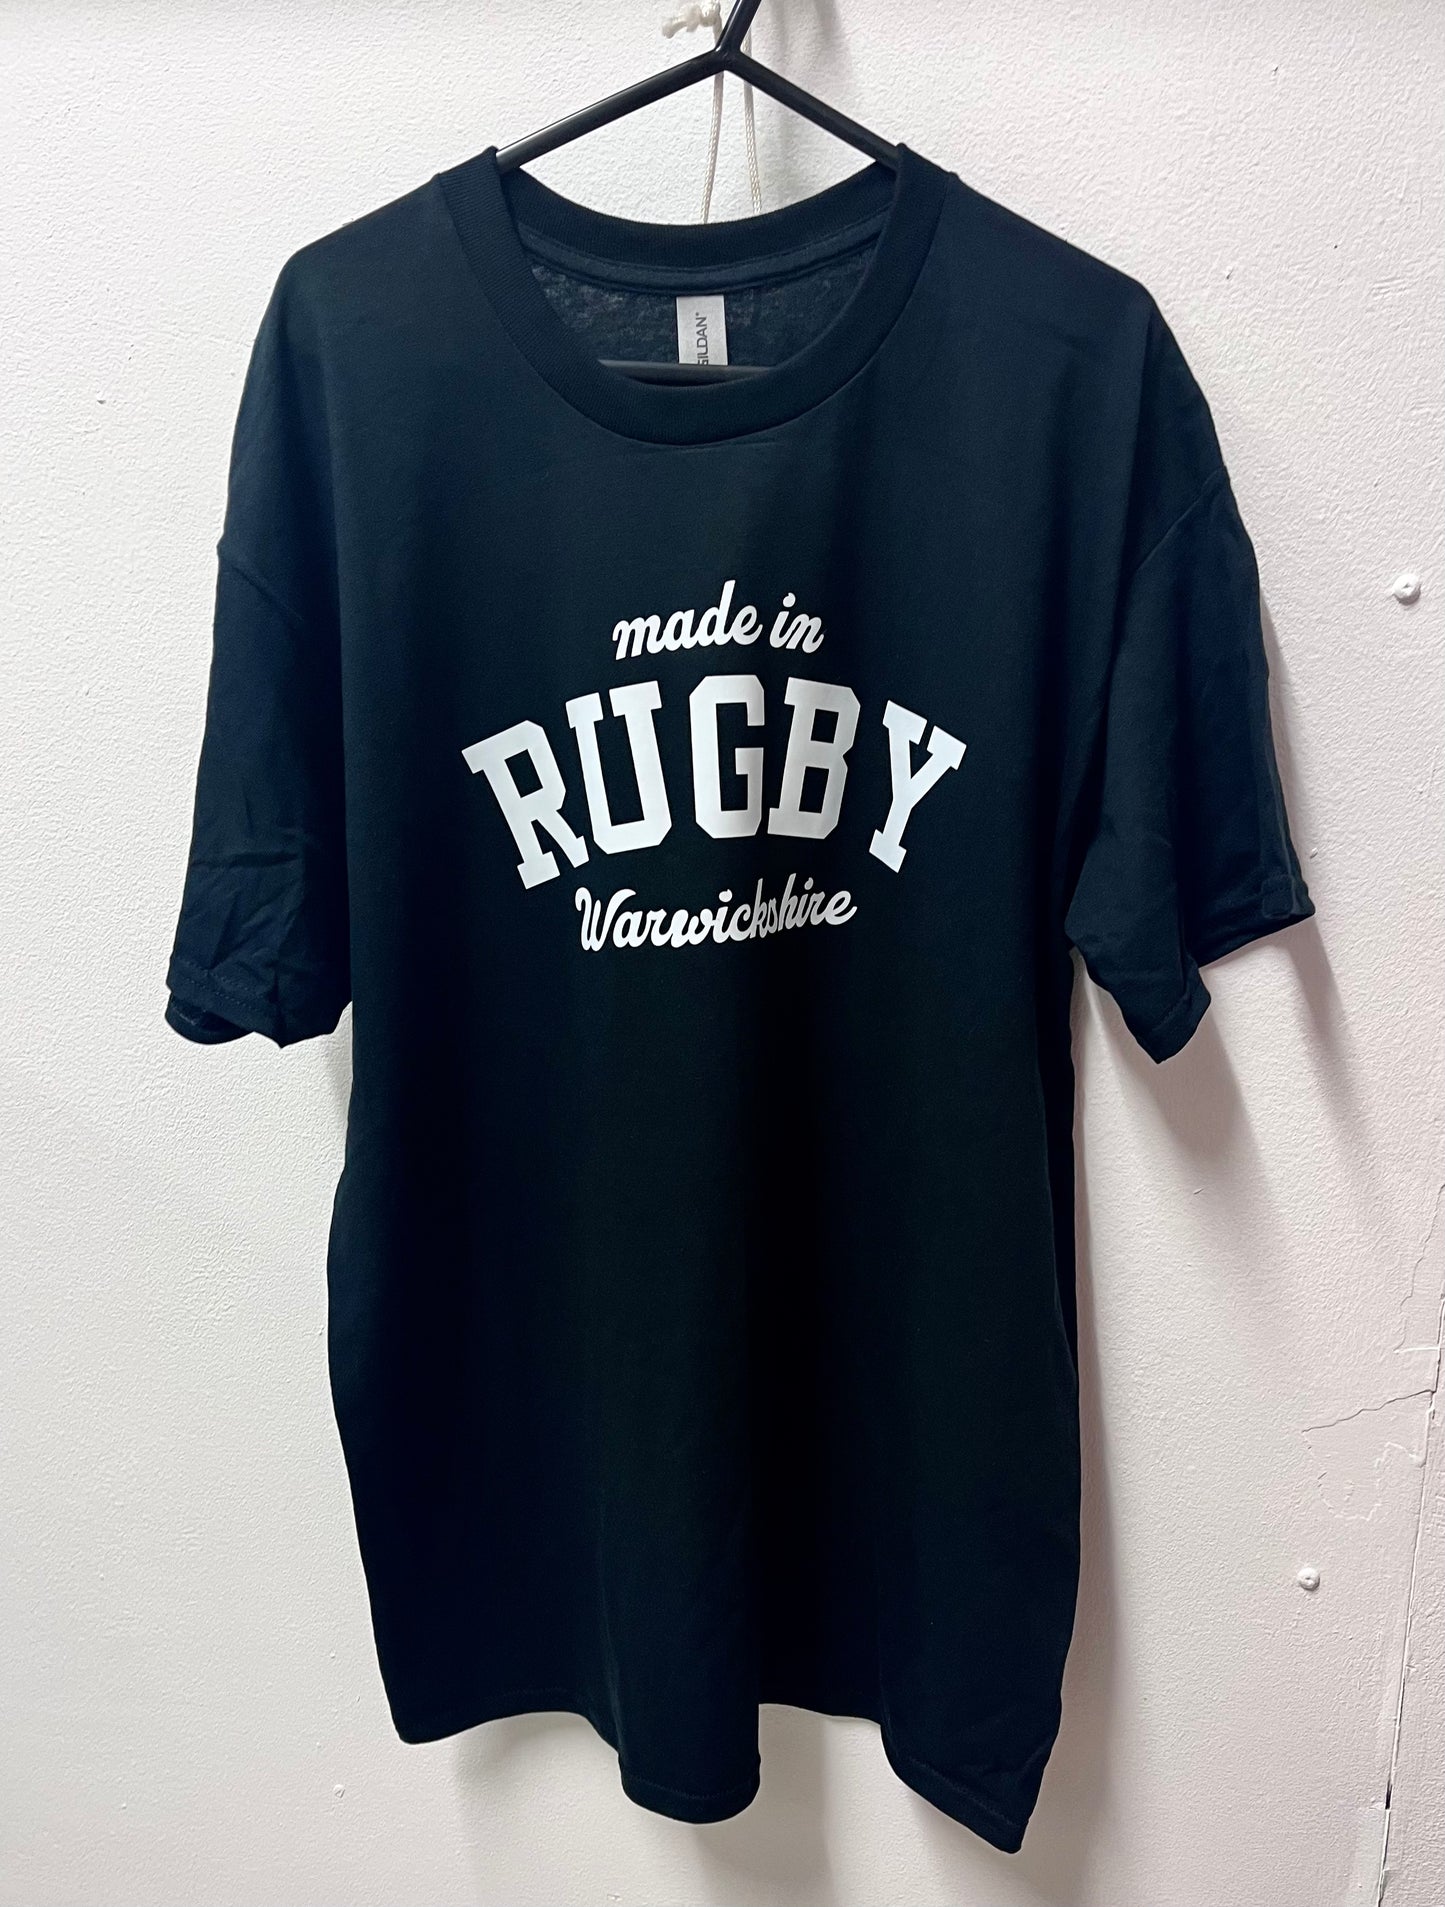 Made in Rugby Warwickshire 100% Cotton Black T-shirt